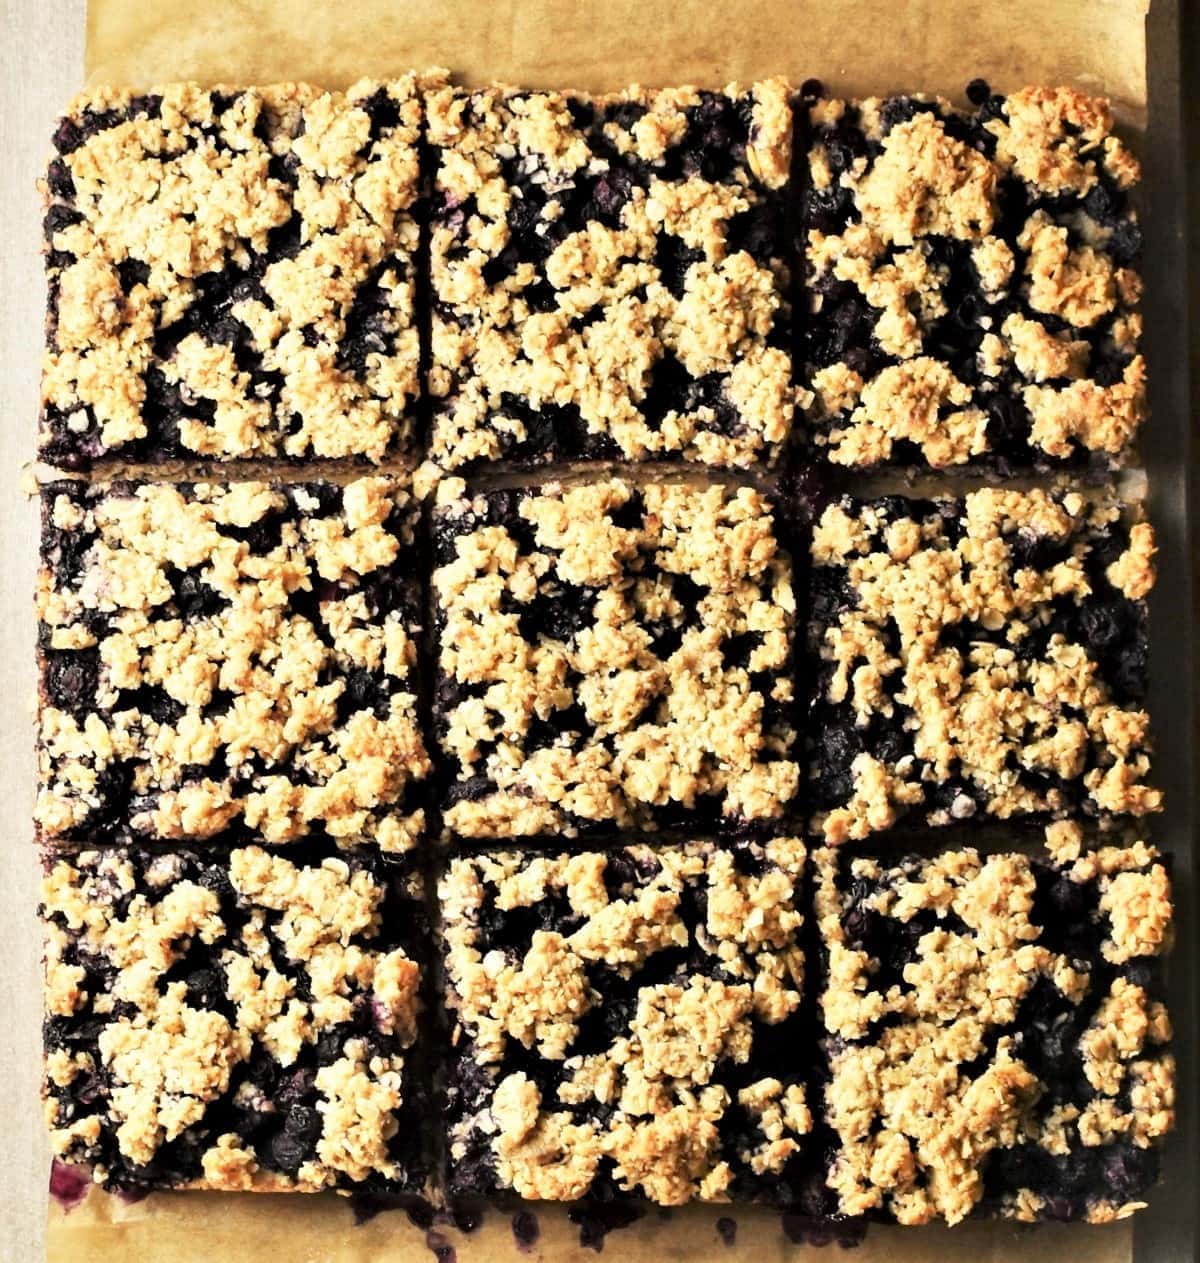 9 blueberry bars on top of parchment.